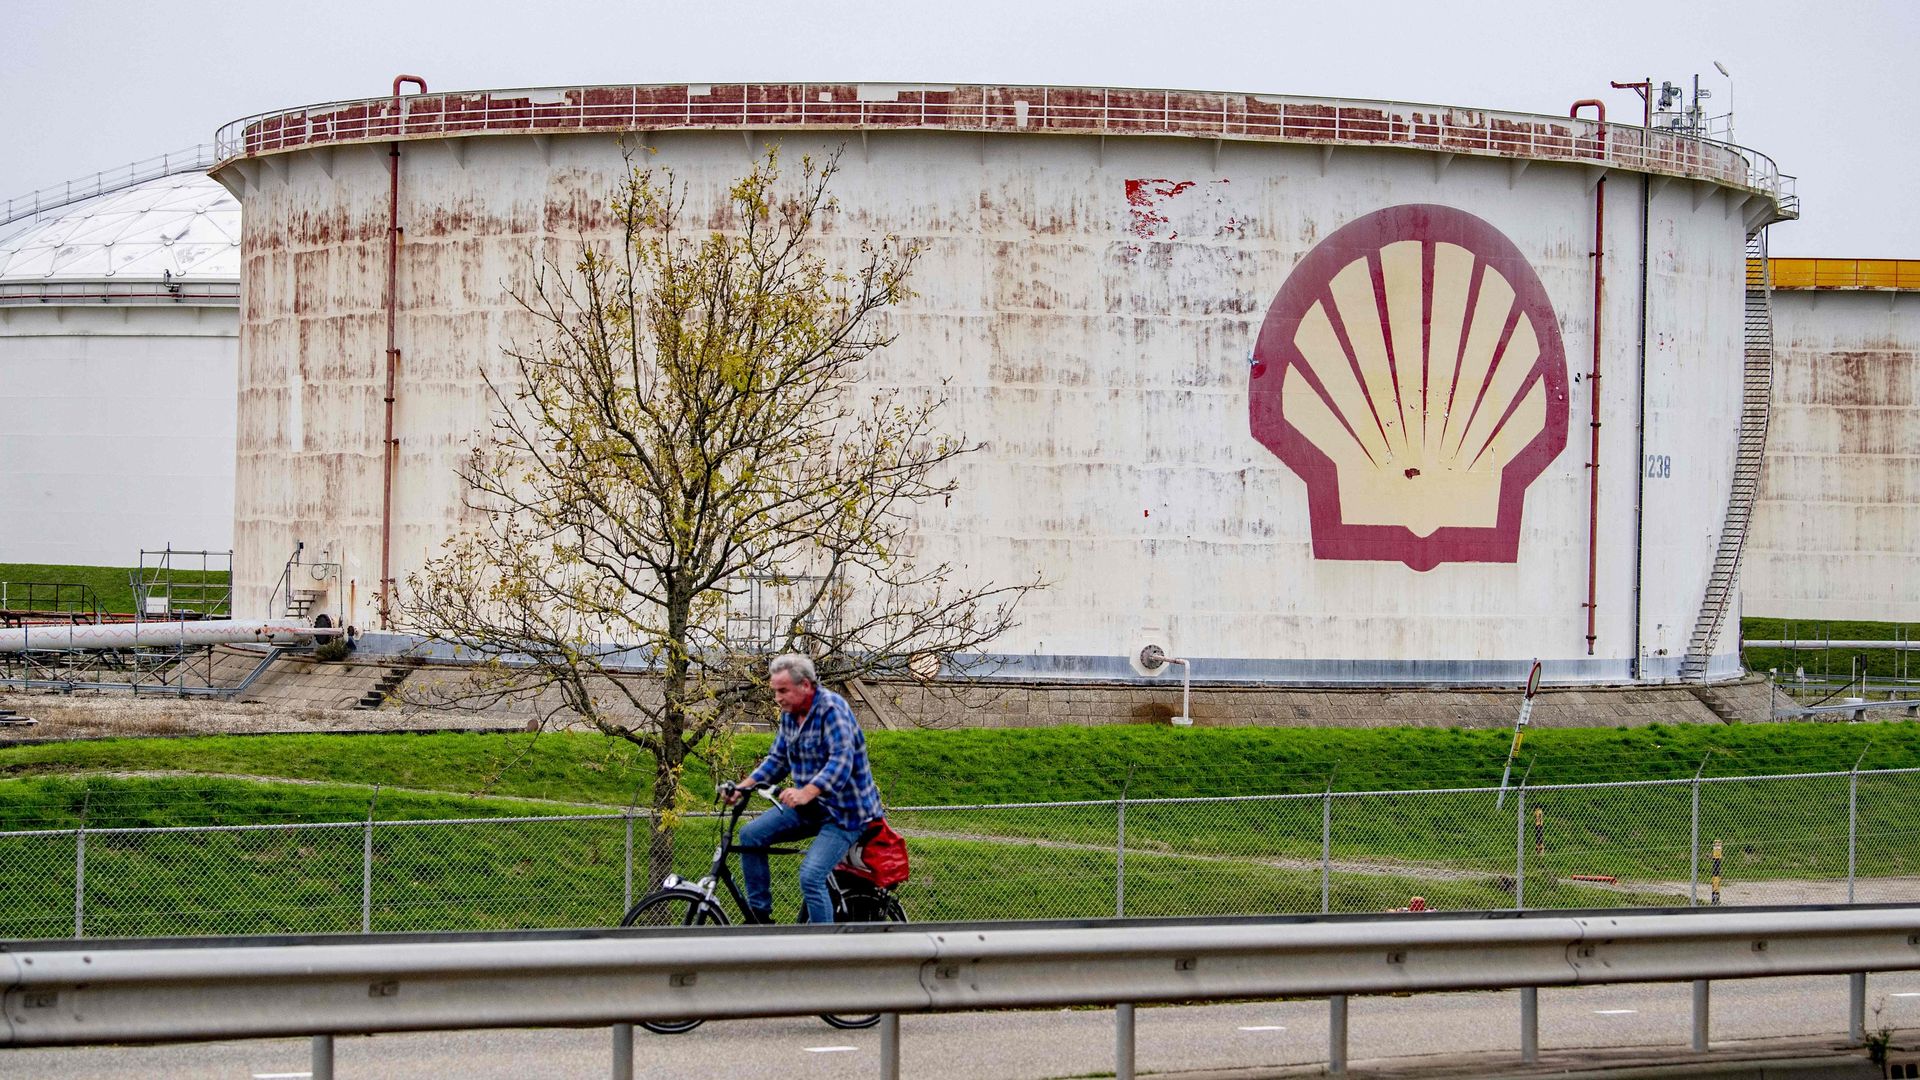 The exterior of the anglo-dutch oil and gas company Shell's refinery in Pernis, Netherlands.